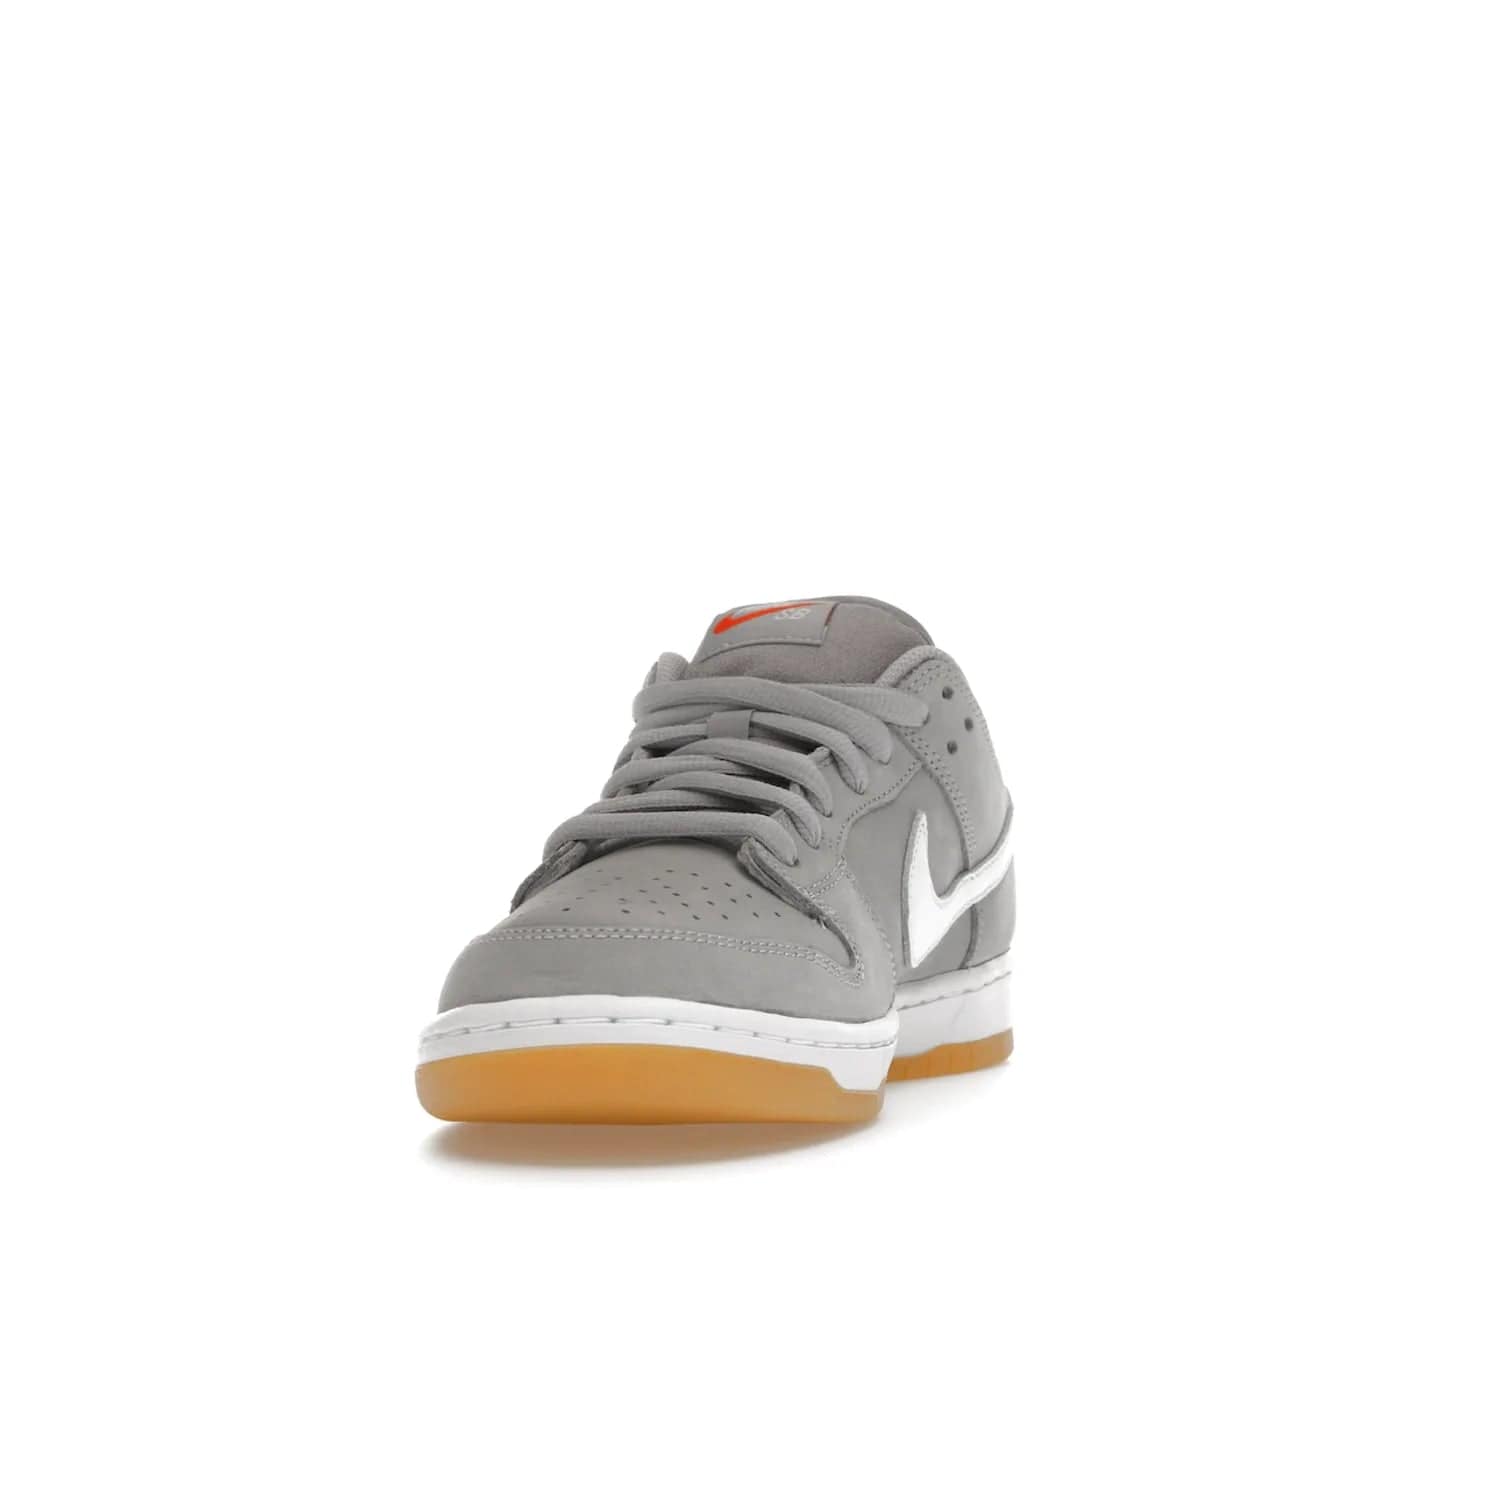 Nike SB Dunk Low Pro ISO Orange Label Wolf Grey Gum - Image 12 - Only at www.BallersClubKickz.com - Introducing Nike's SB Dunk Low Pro ISO Orange Label Wolf Grey Gum - a stylish shoe with a premium Wolf Grey upper, white leather Nike Swoosh, and an eye-catching gum outsole. With special Nike branding and packaging, this shoe adds a unique fashion statement. Out Feb. 24, 2023.